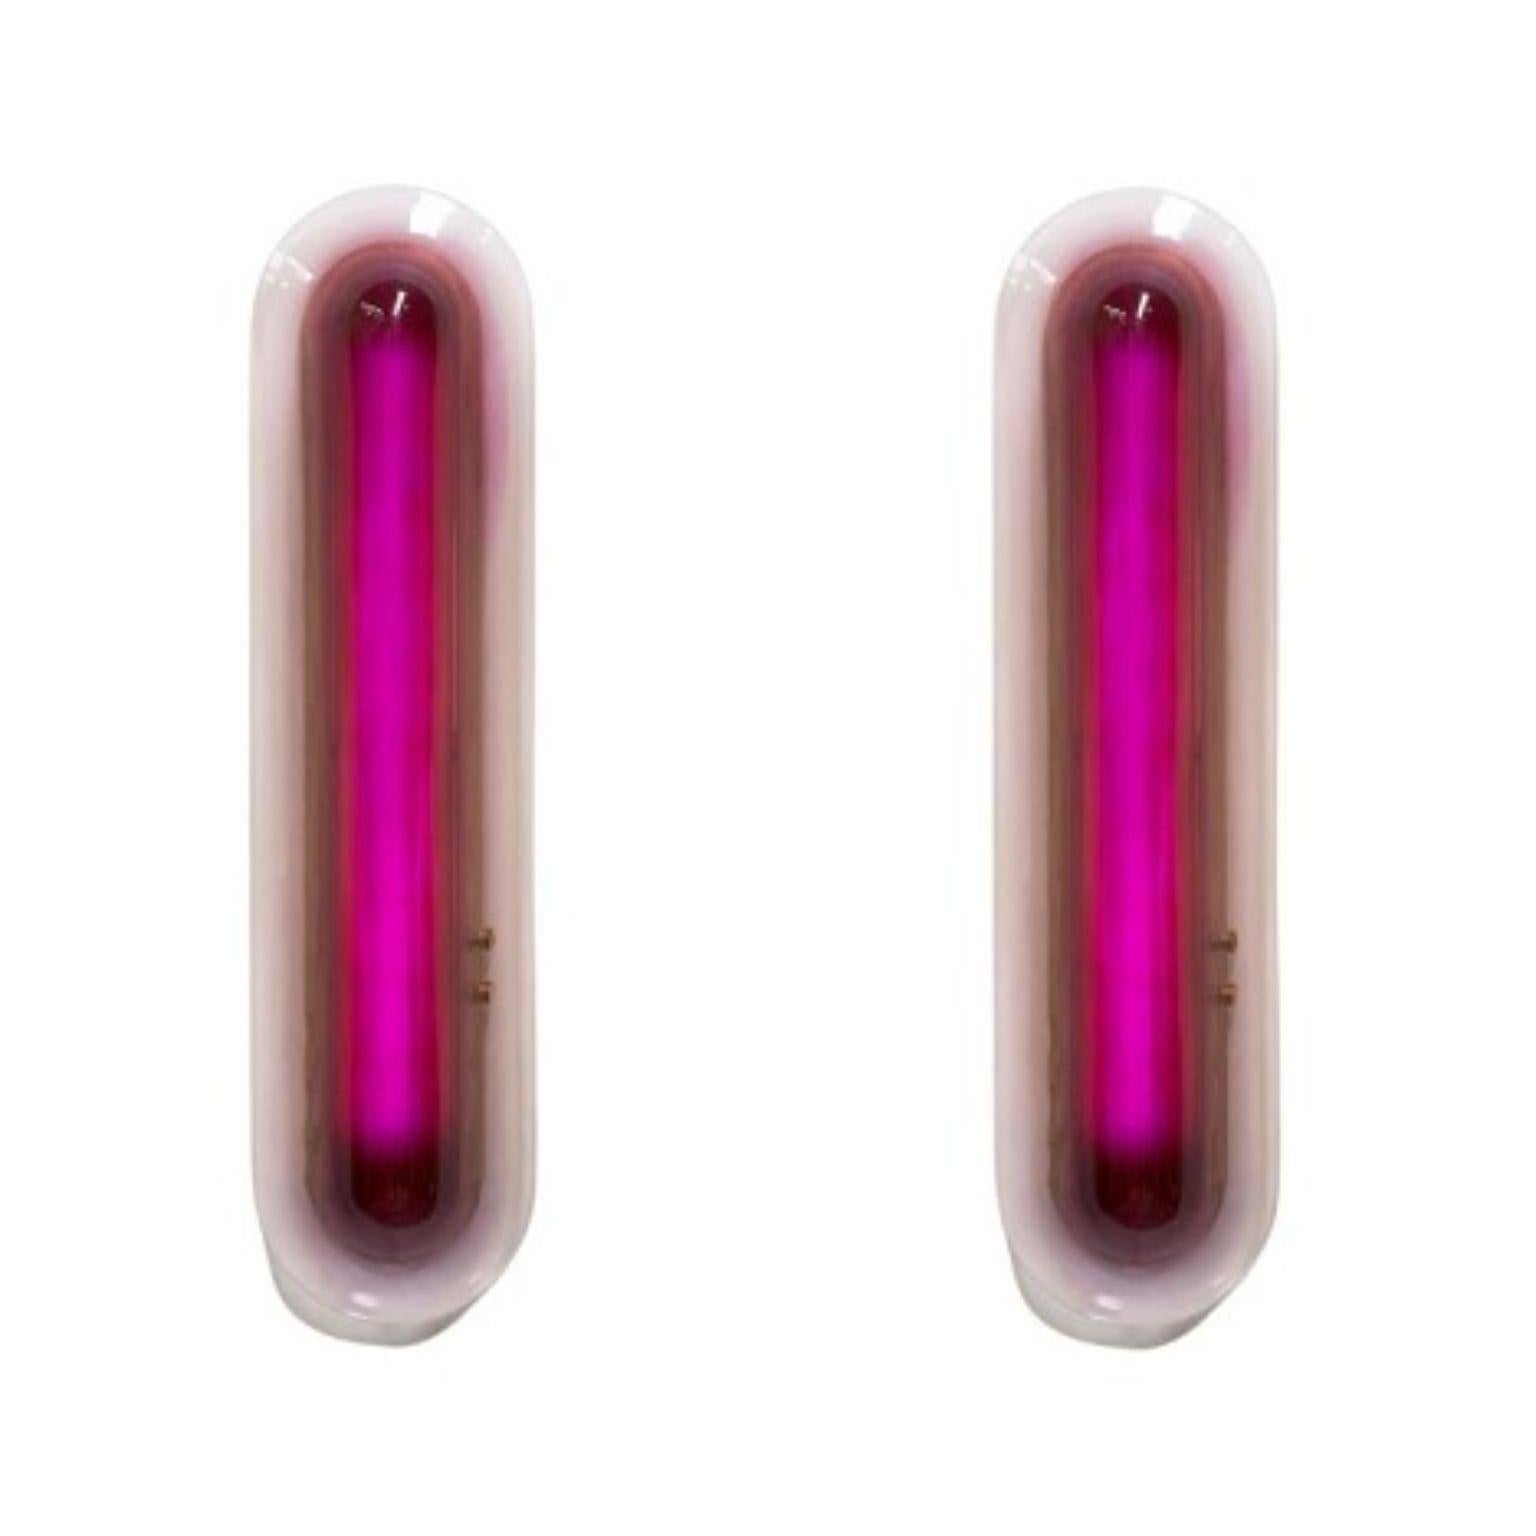 Set of 2 joy wall lamps by Draga & Aurel
Dimensions: W 20, D 13, H 80
Materials: Resin and solid brass

These organic light ‘pills’ reflect the inspiration from the 1970s and the Space Age. The final colour is the result of matching layers of